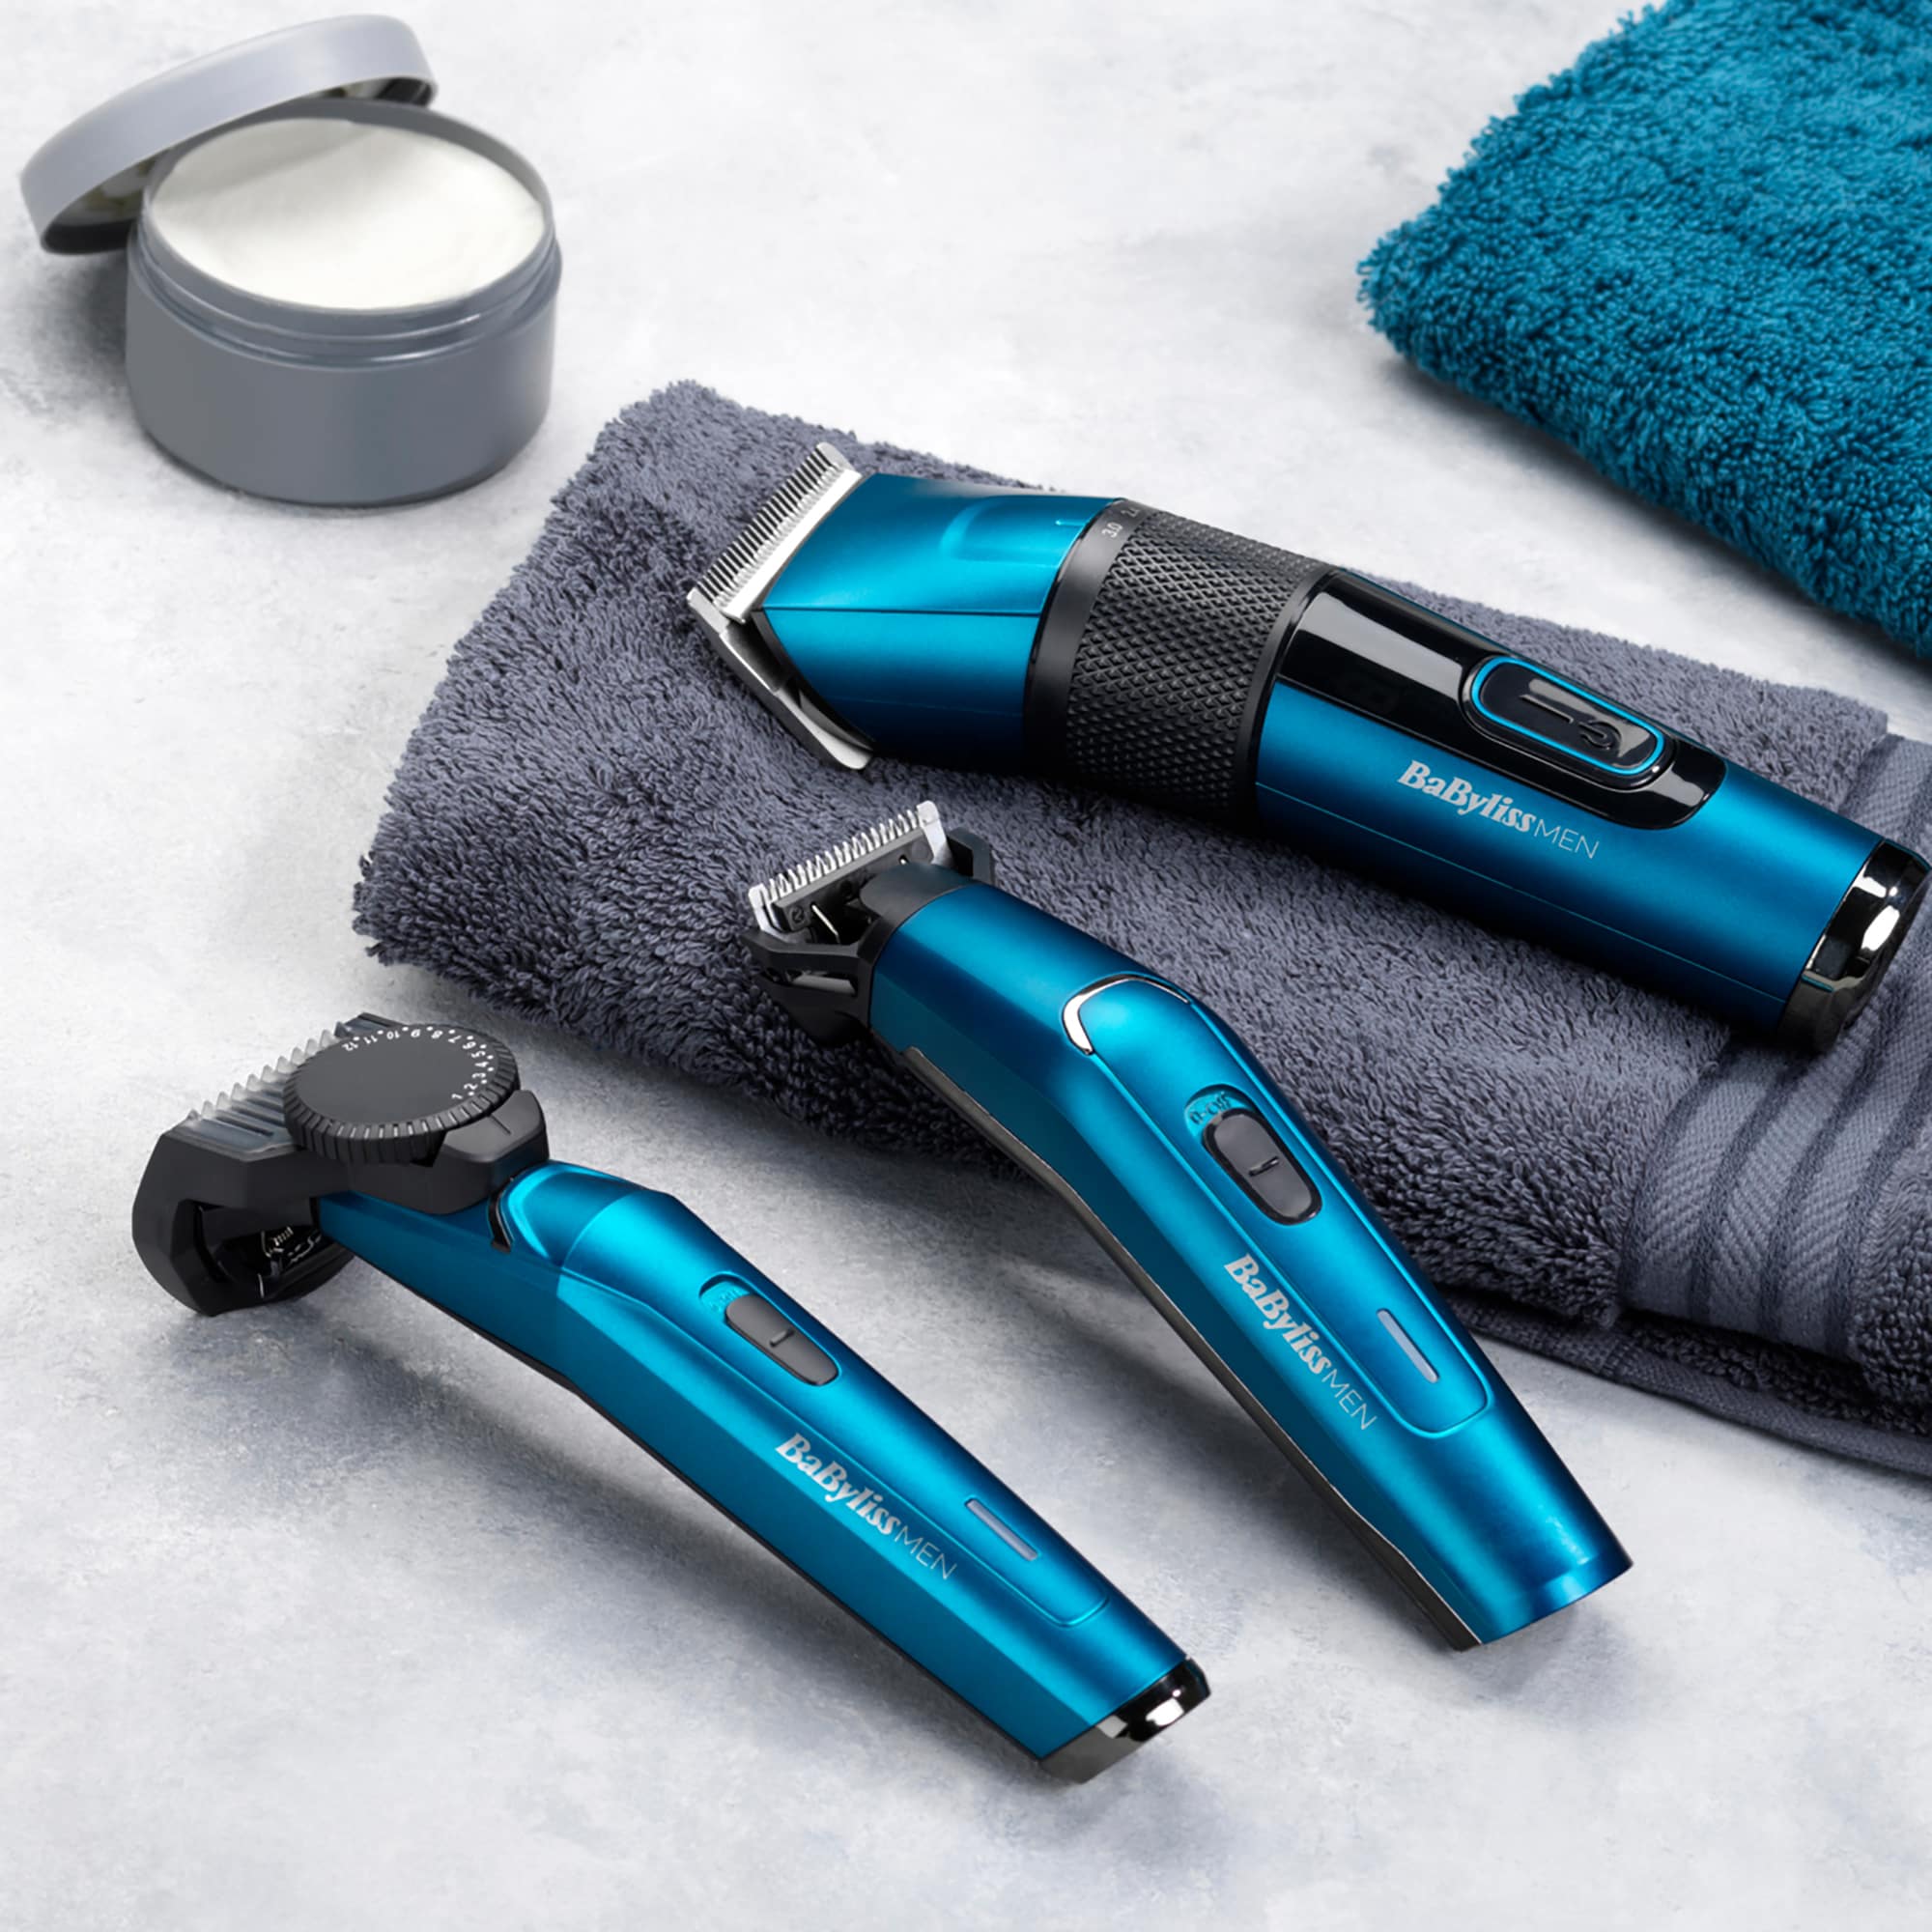 babyliss japanese steel 12 in 1